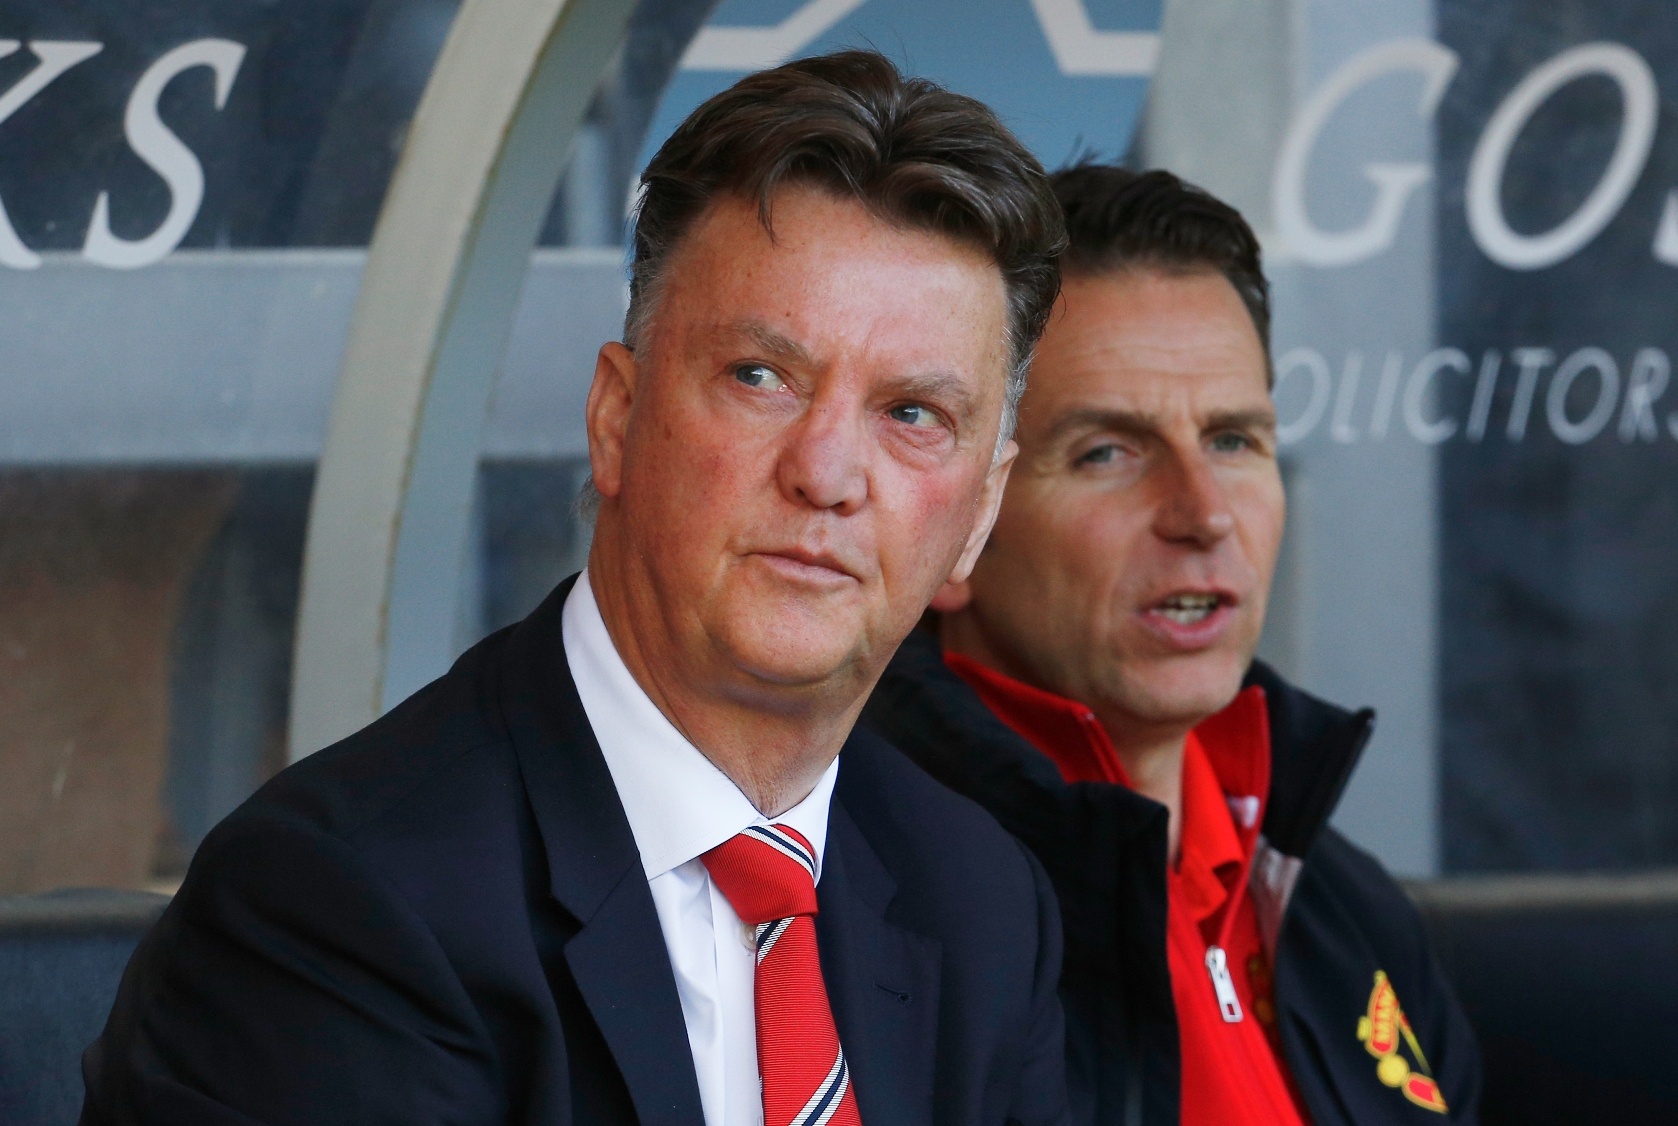 Football - Hull City v Manchester United - Barclays Premier League - The Kingston Communications Stadium - 14/15 - 24/5/15 Manchester United manager Louis van Gaal Action Images via Reuters / Craig Brough 